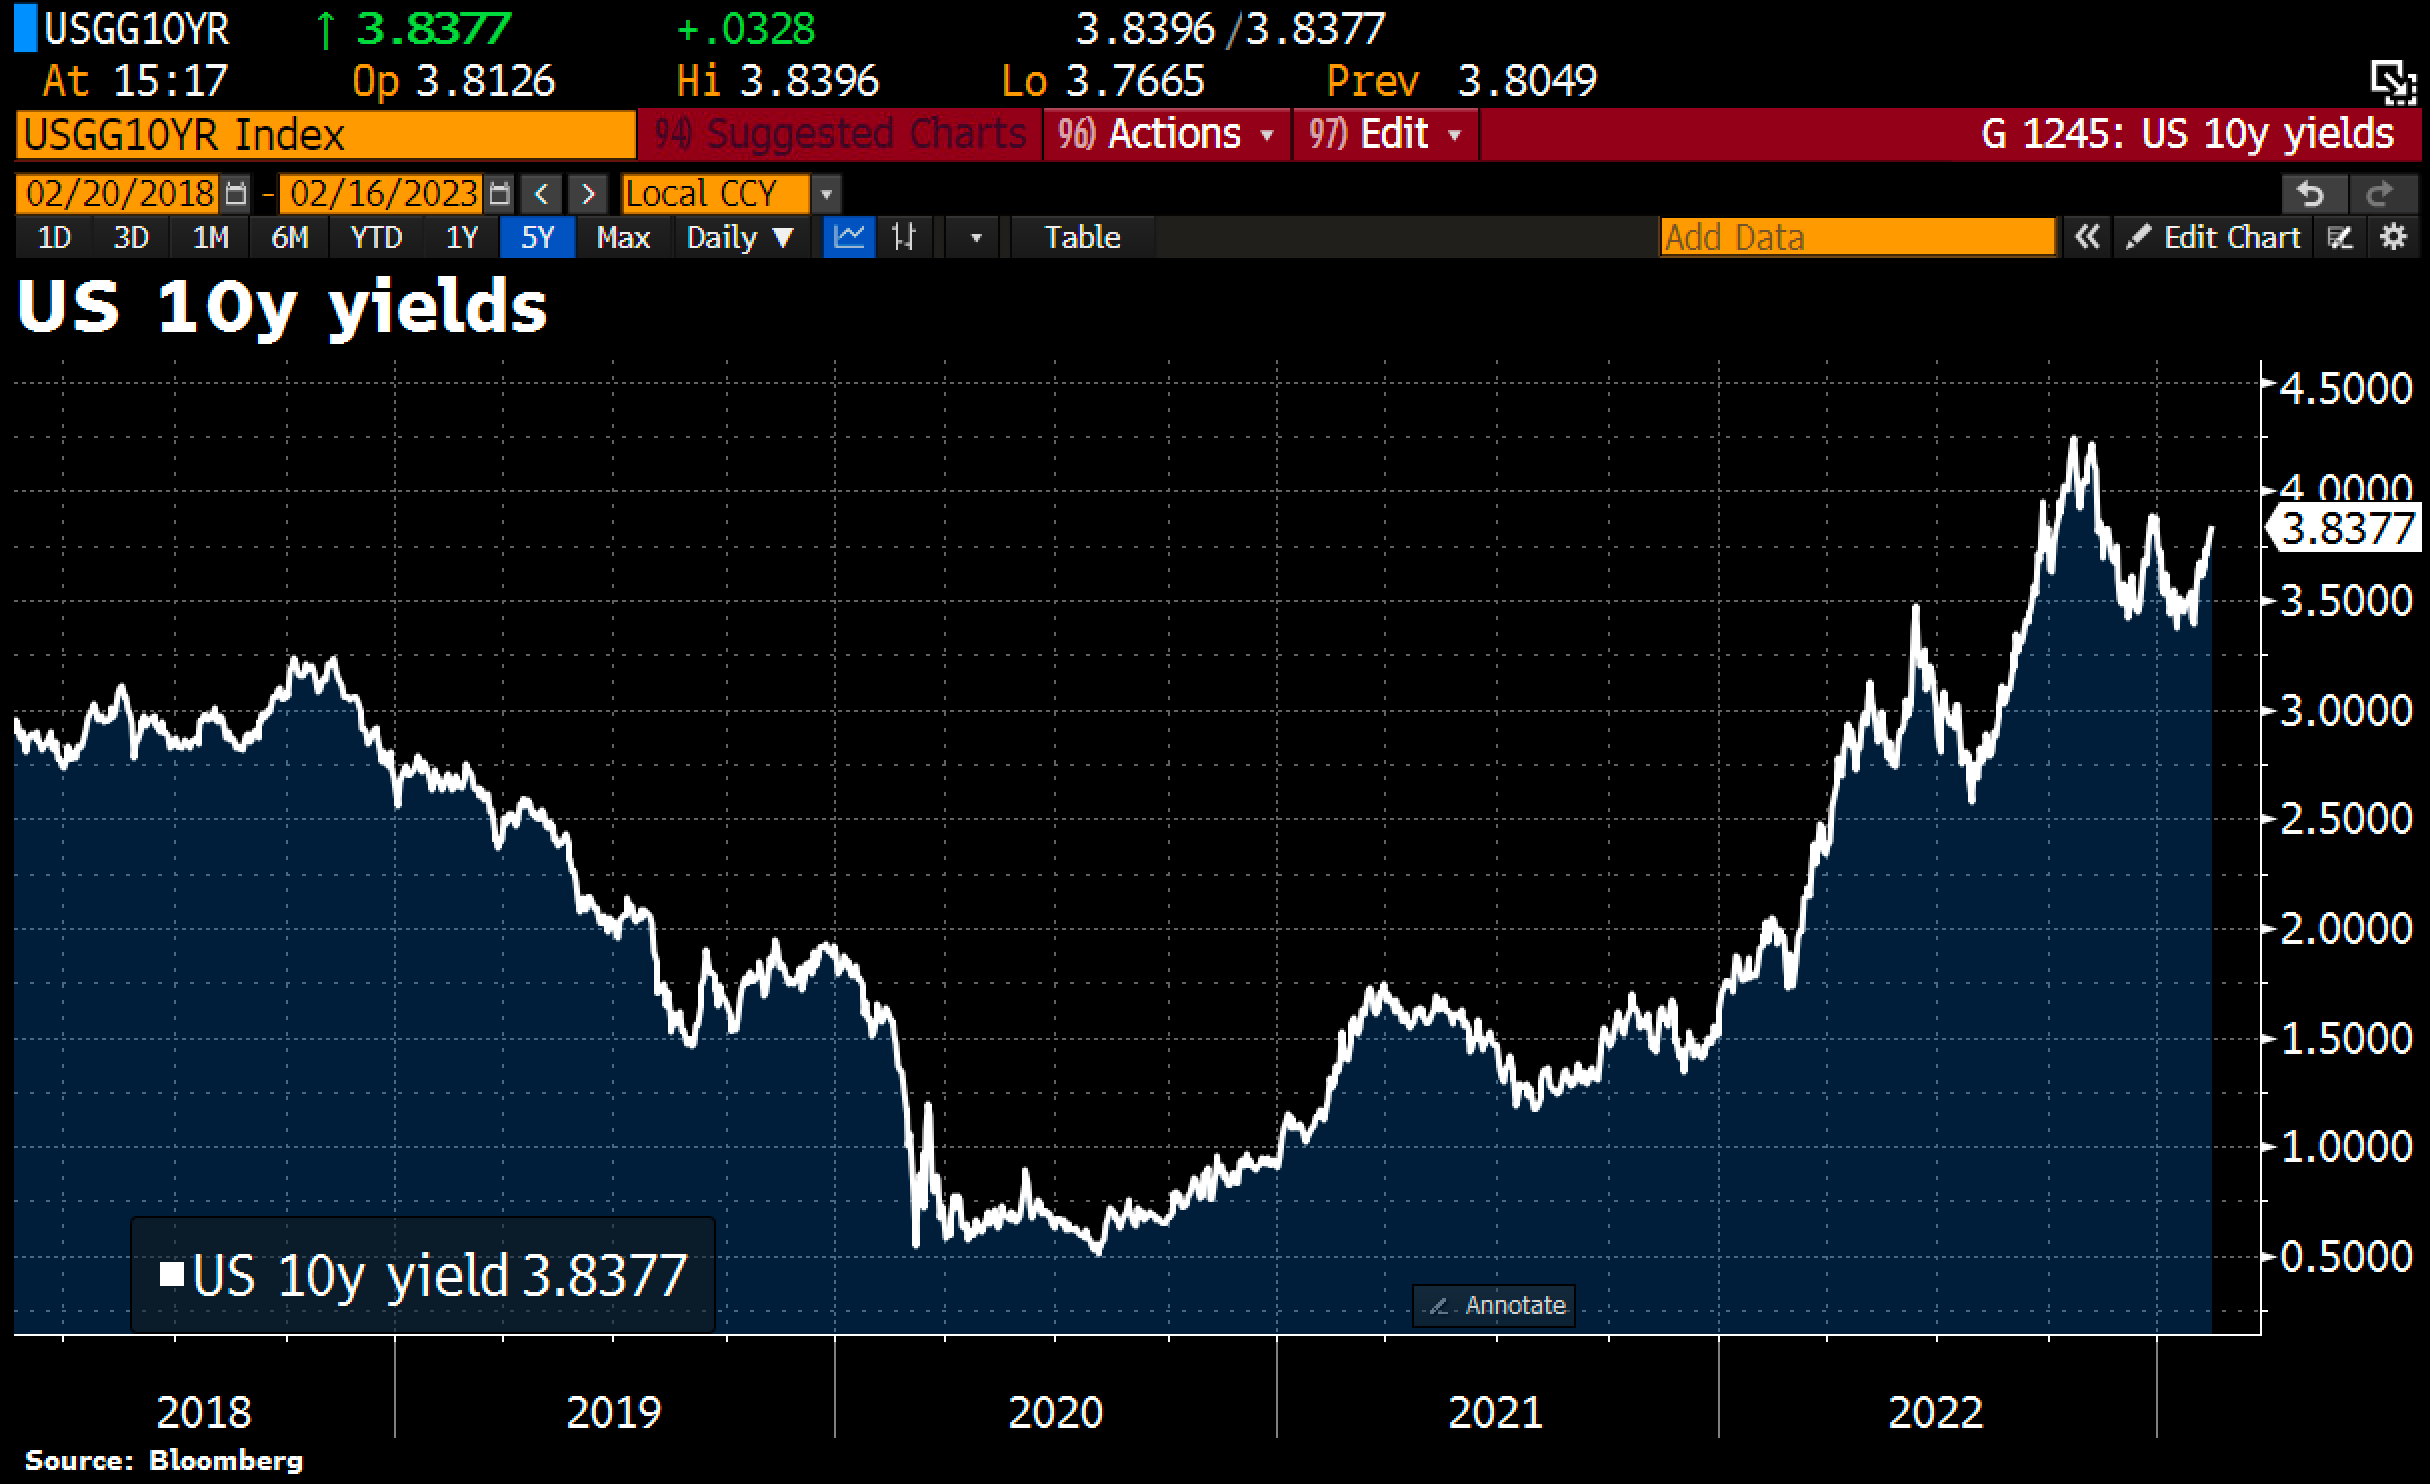 US 10y yields jump to 3.84%, new 2023 high, following hotter-than-expected US PPI data